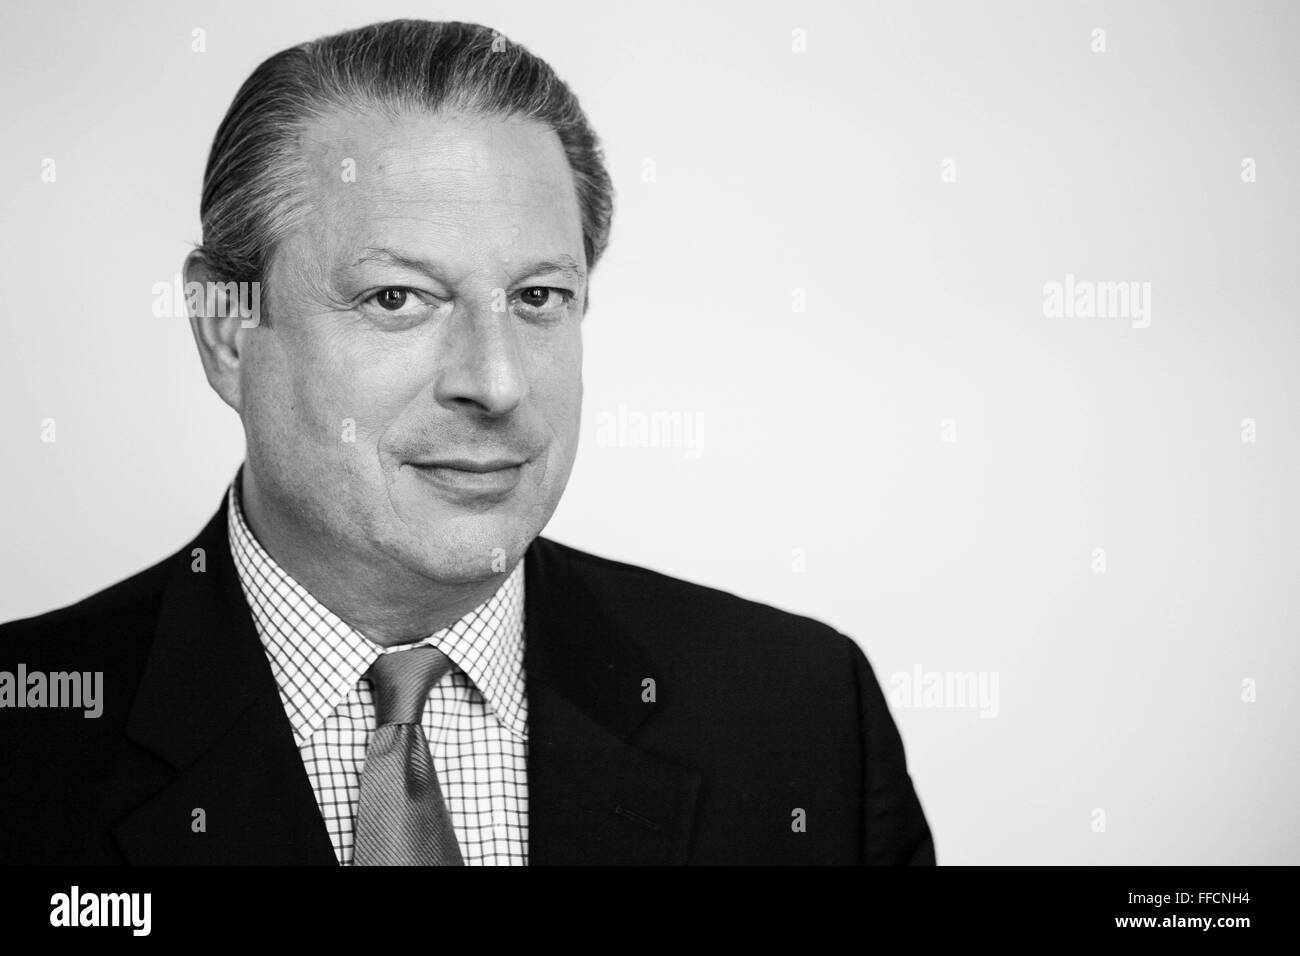 Al Gore, American politician, advocate and philanthropist. Former Vice President of the United States. Speaking at the 2007 Ashden awards, Royal Geographical Society, London. Stock Photo